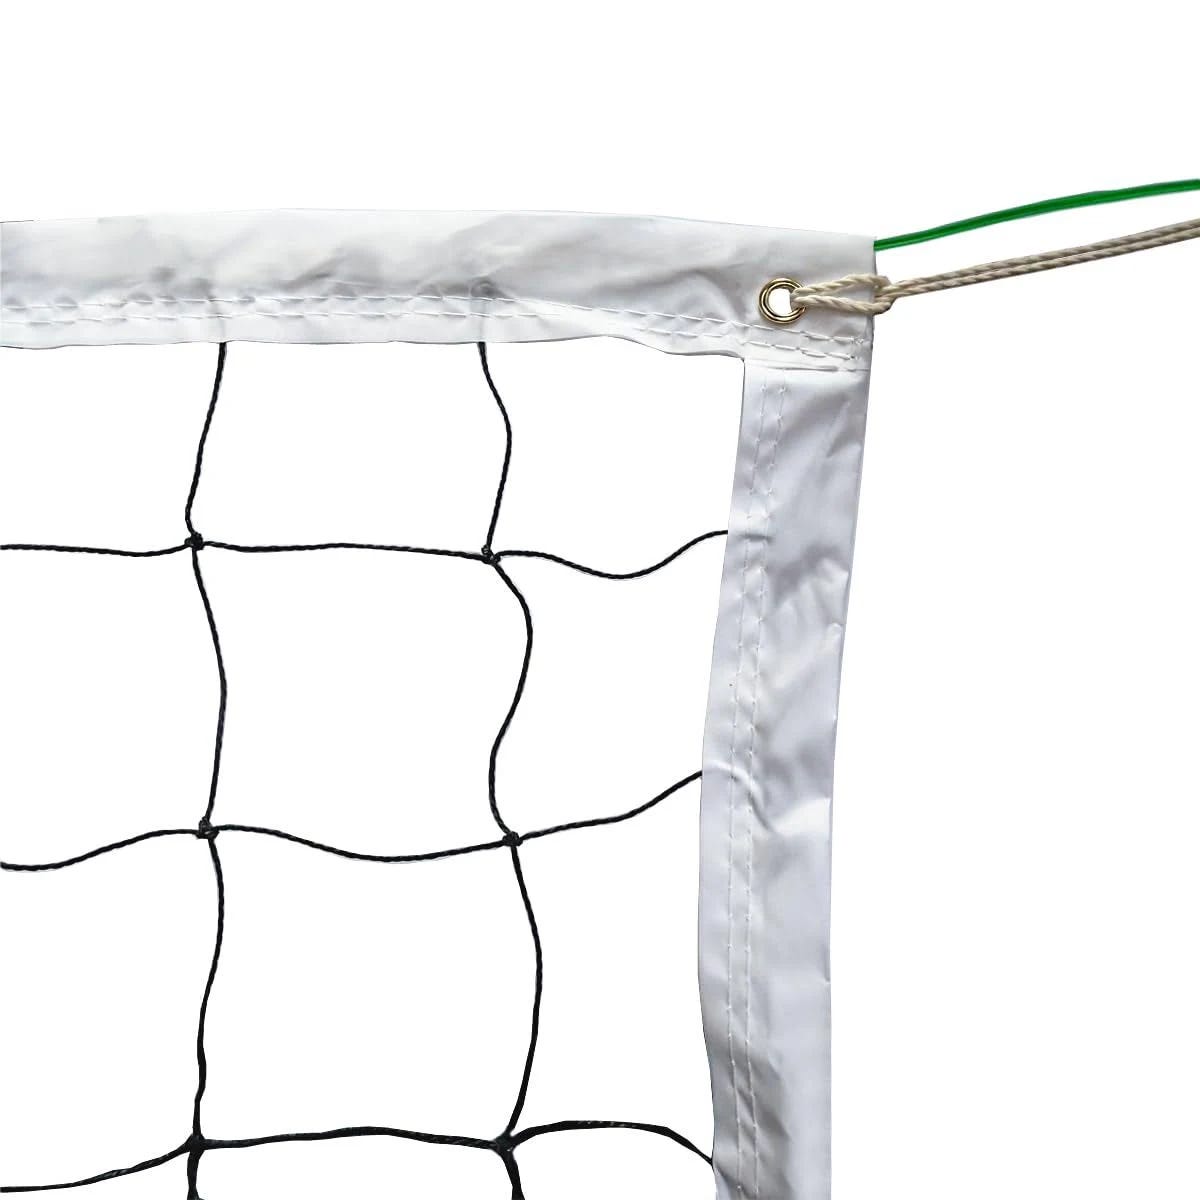 DOURR Professional Volleyball Net - 32' x 3' for Indoor & Outdoor | Image